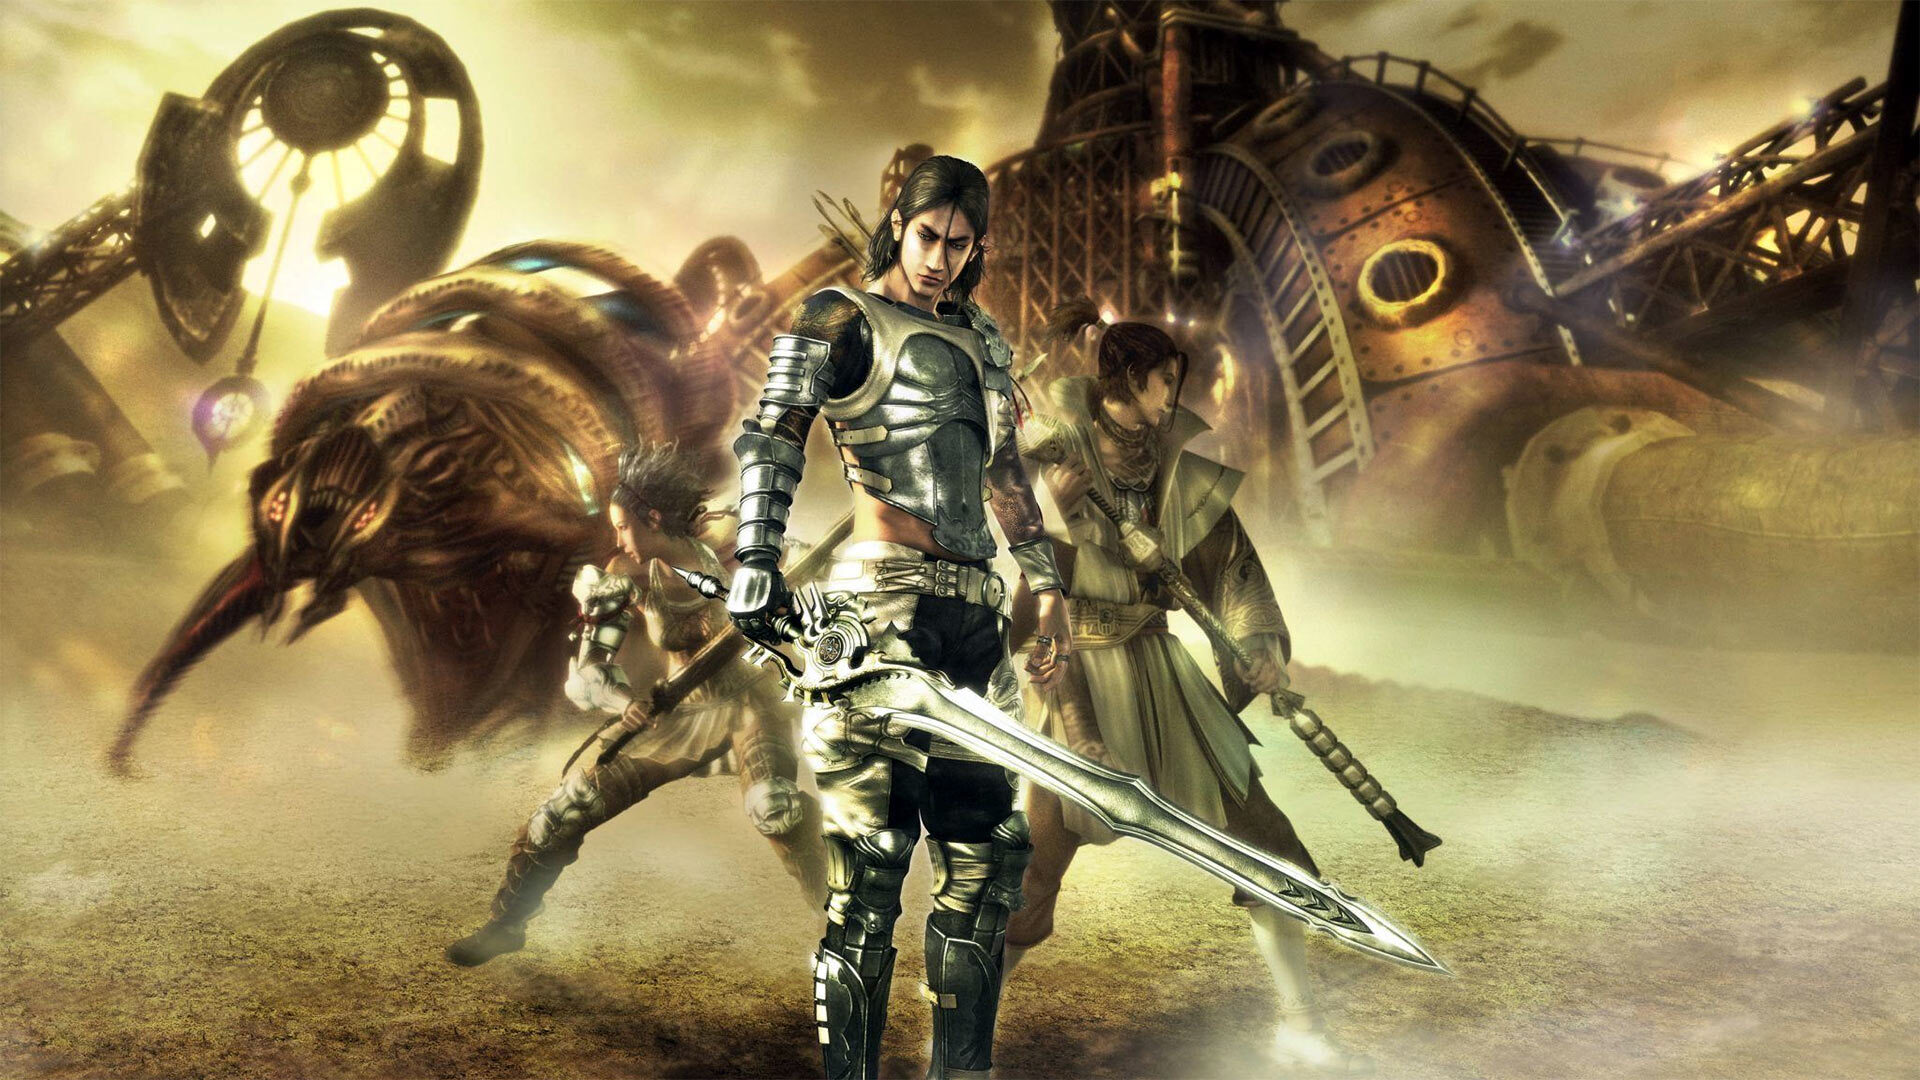 Blue Dragon, Lost Odyssey Being Delisted From Xbox 360 Marketplace